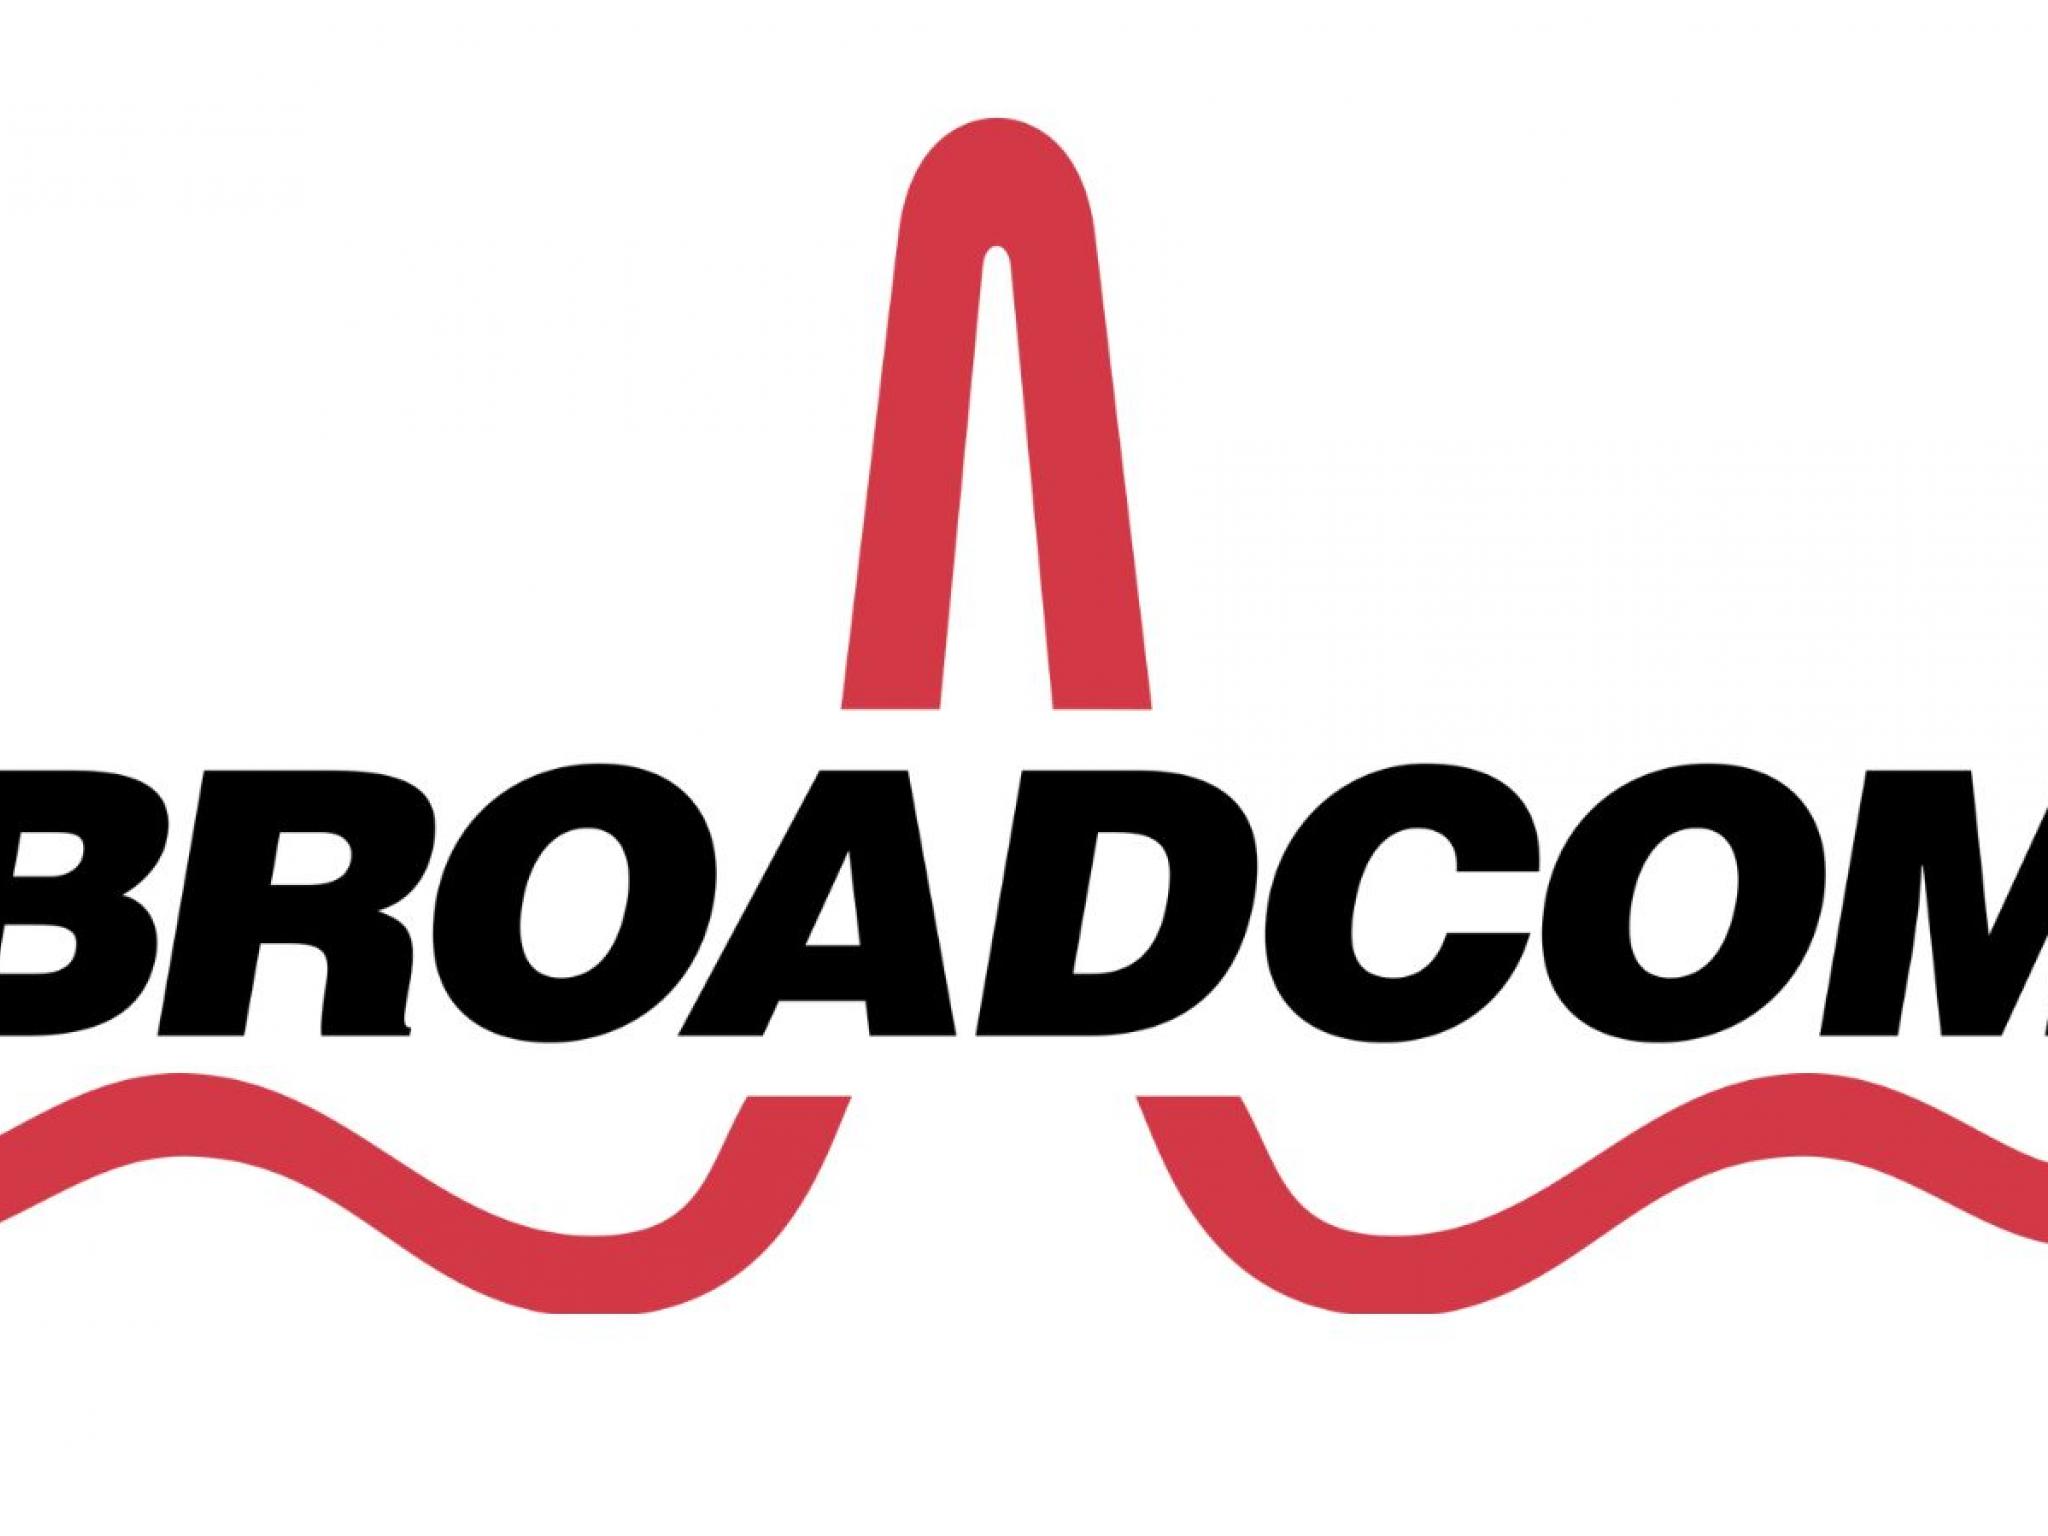  broadcom-to-rally-around-21-here-are-10-top-analyst-forecasts-for-friday 